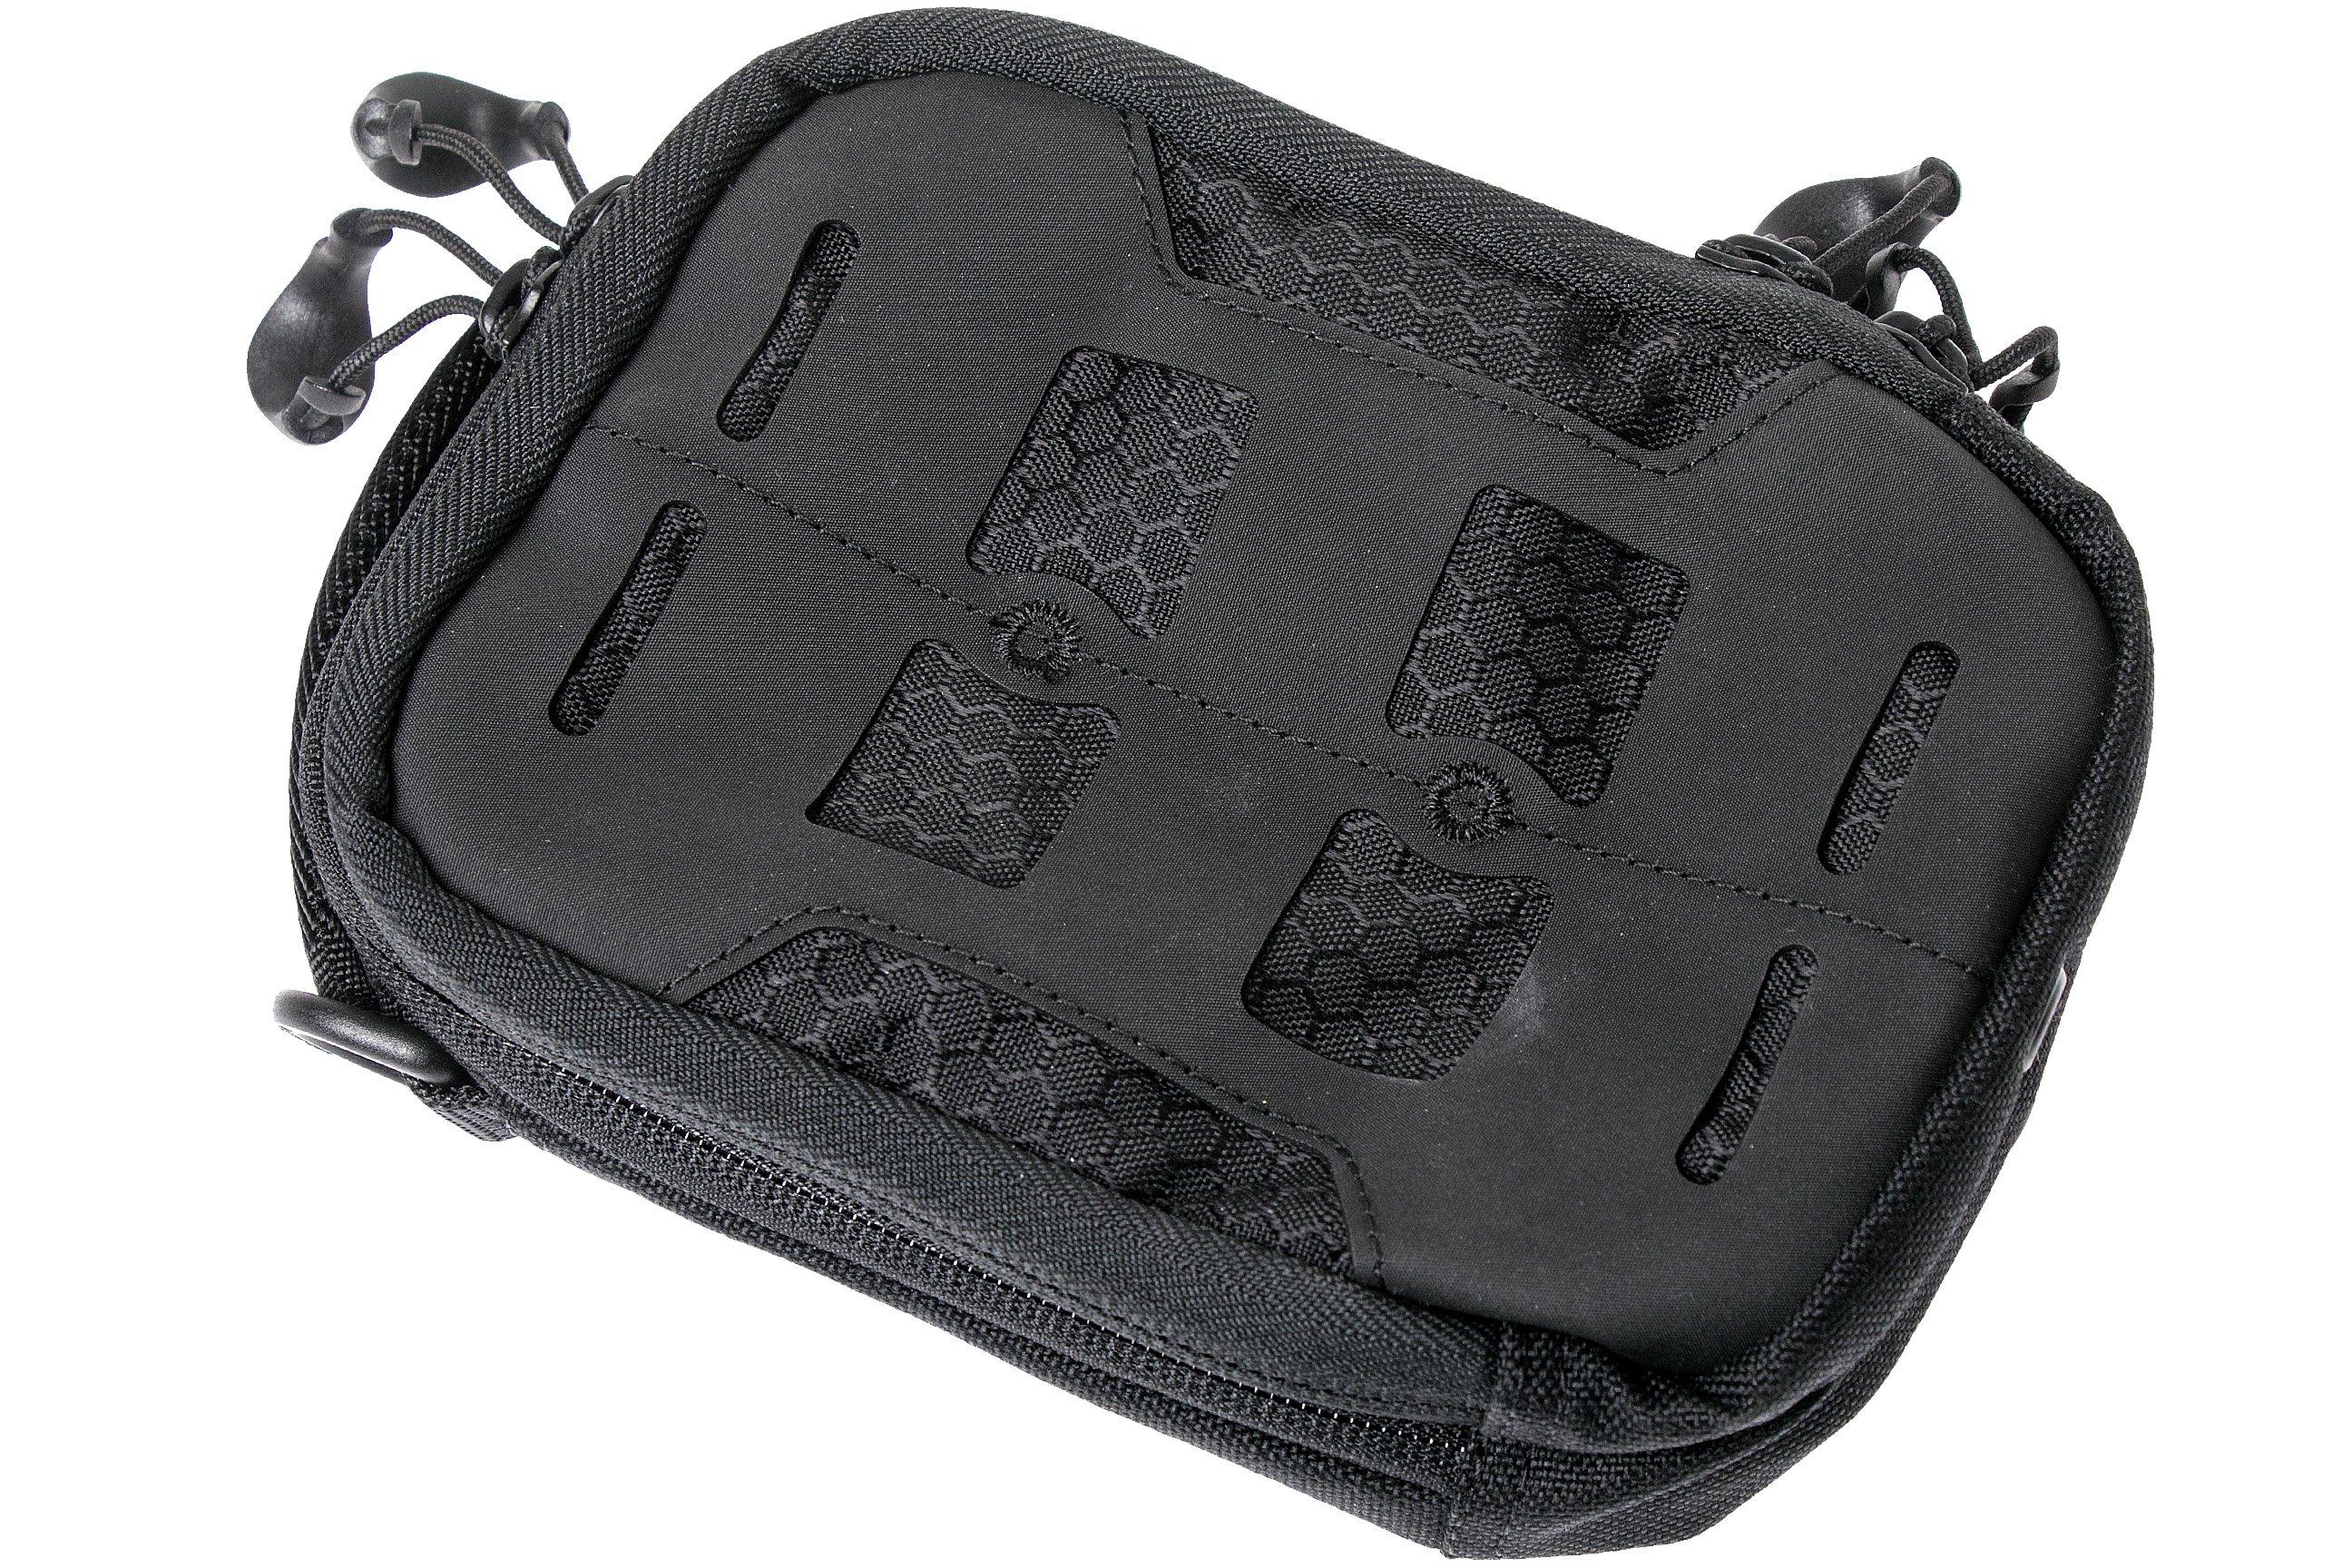 Maxpedition CAP Compact Administration Pouch Black, AGR